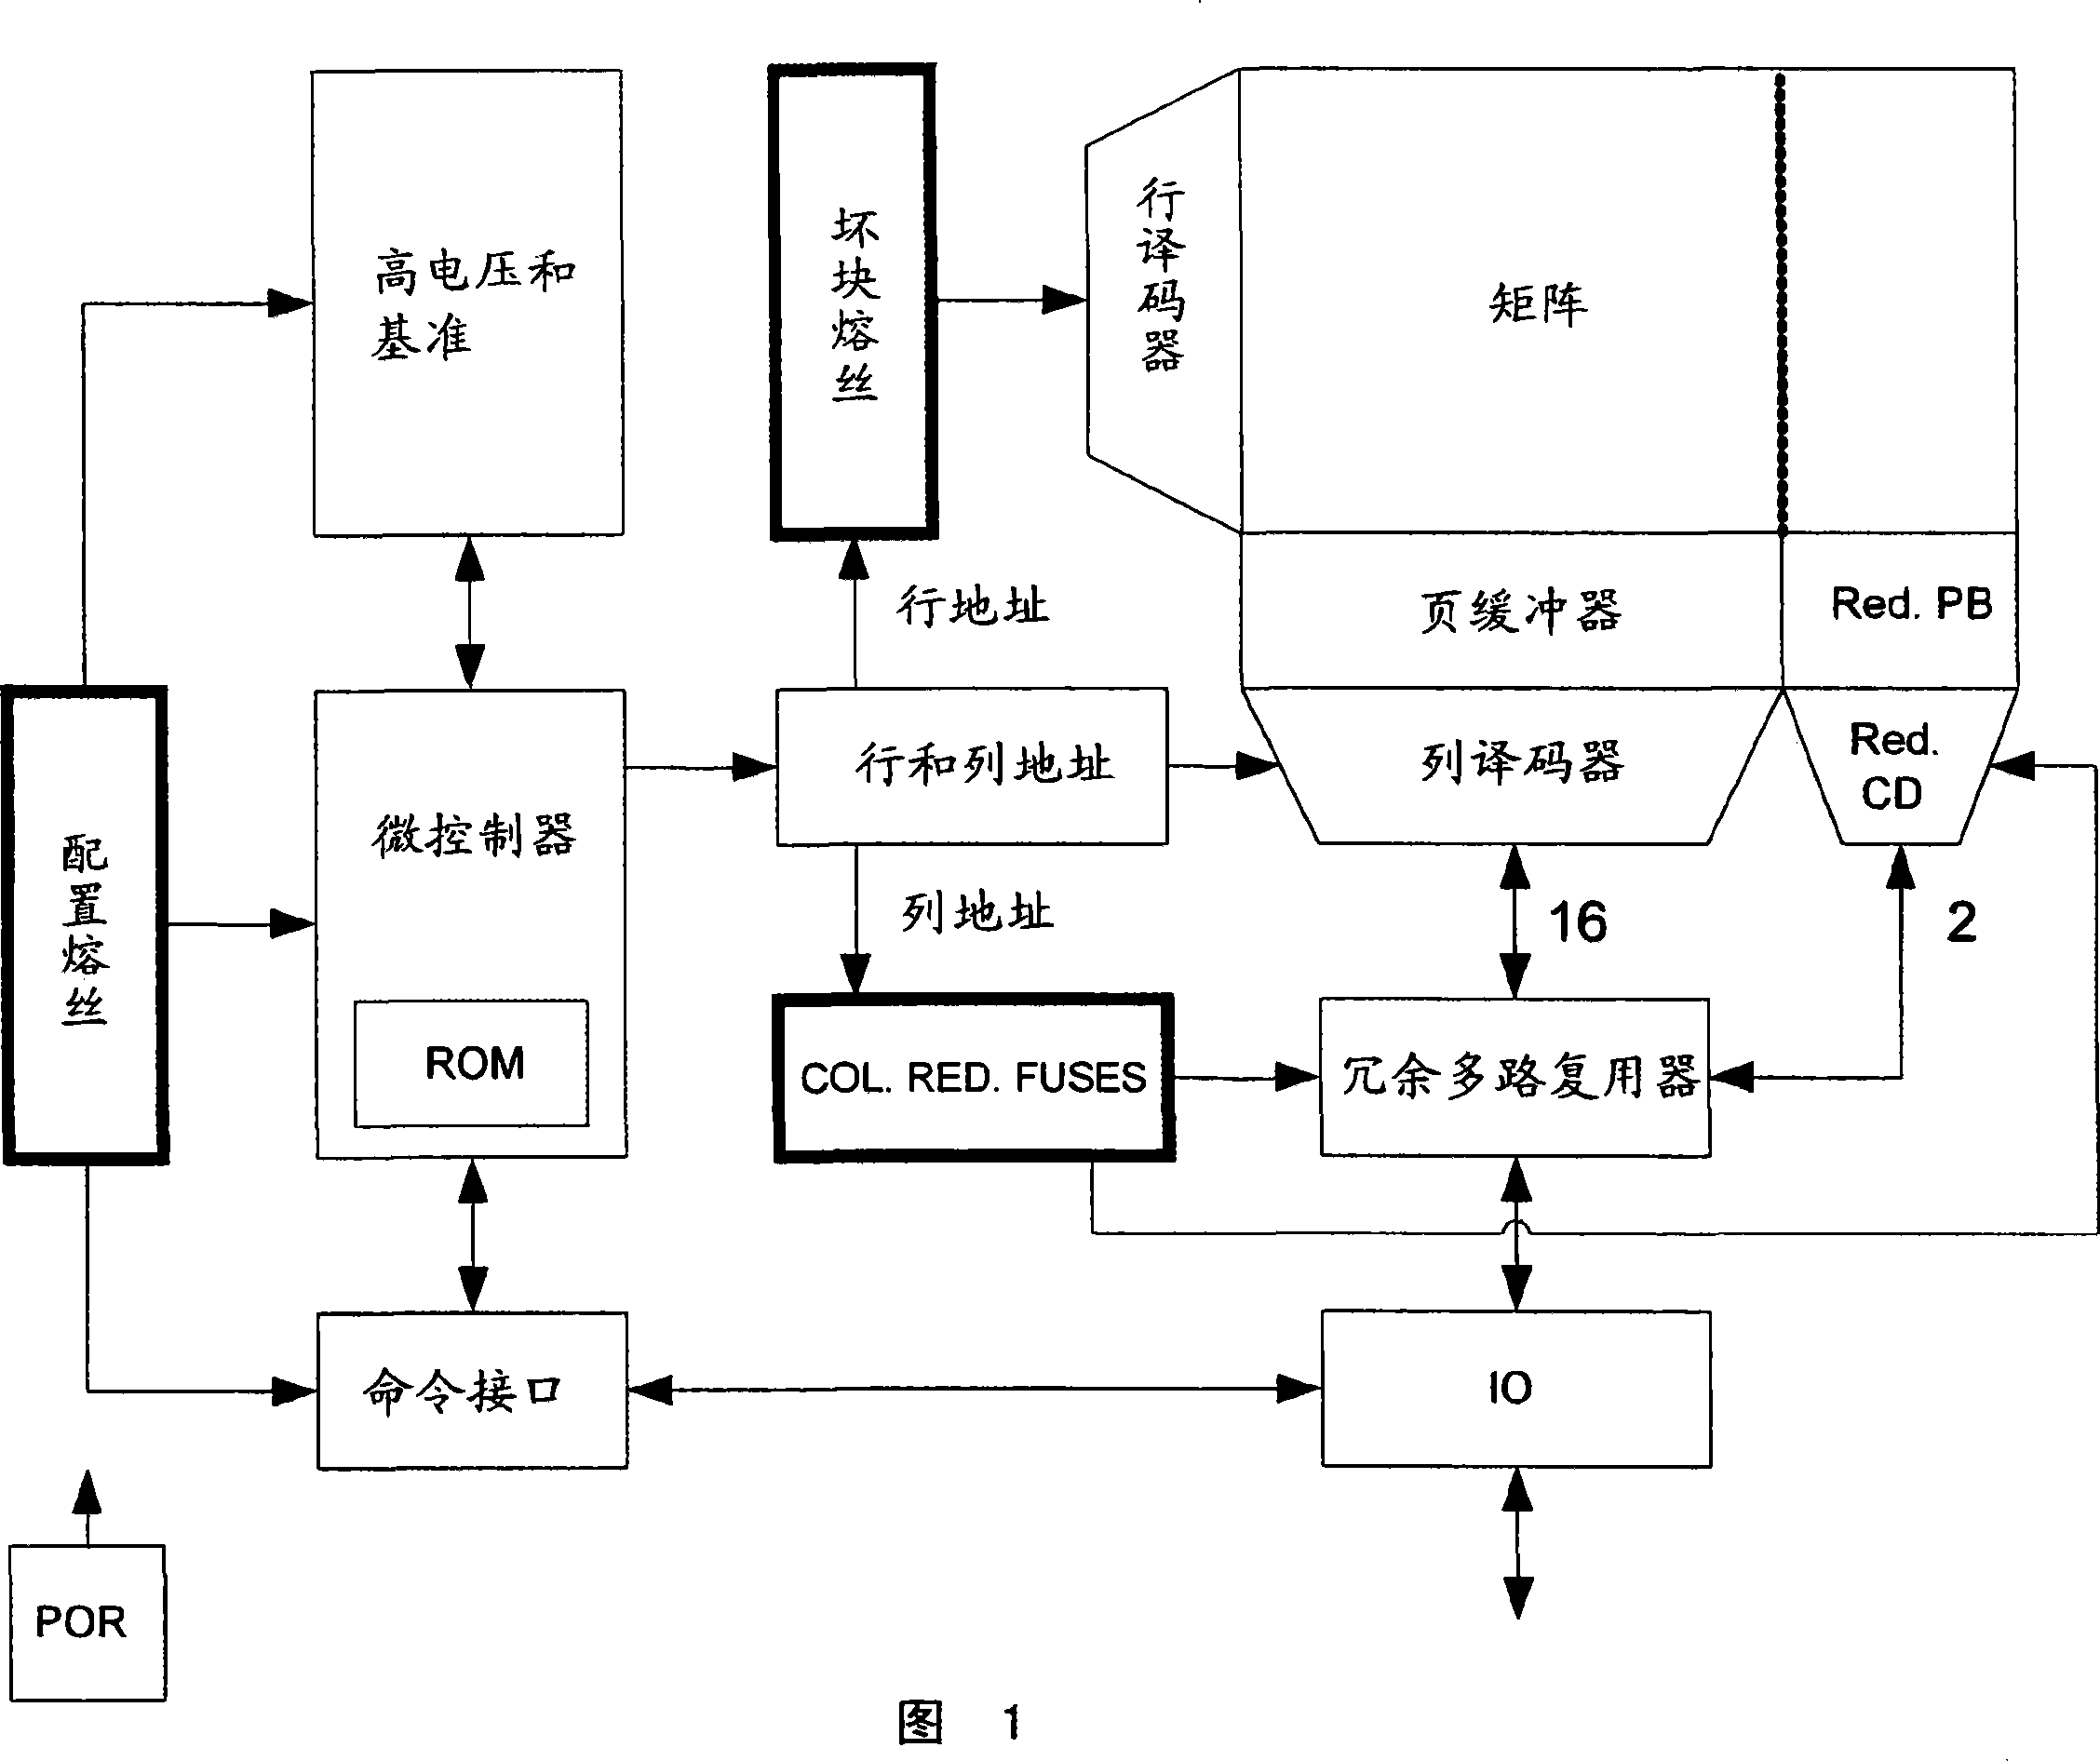 Nand flash memory device with ecc protected reserved area for non volatile storage of redundancy data